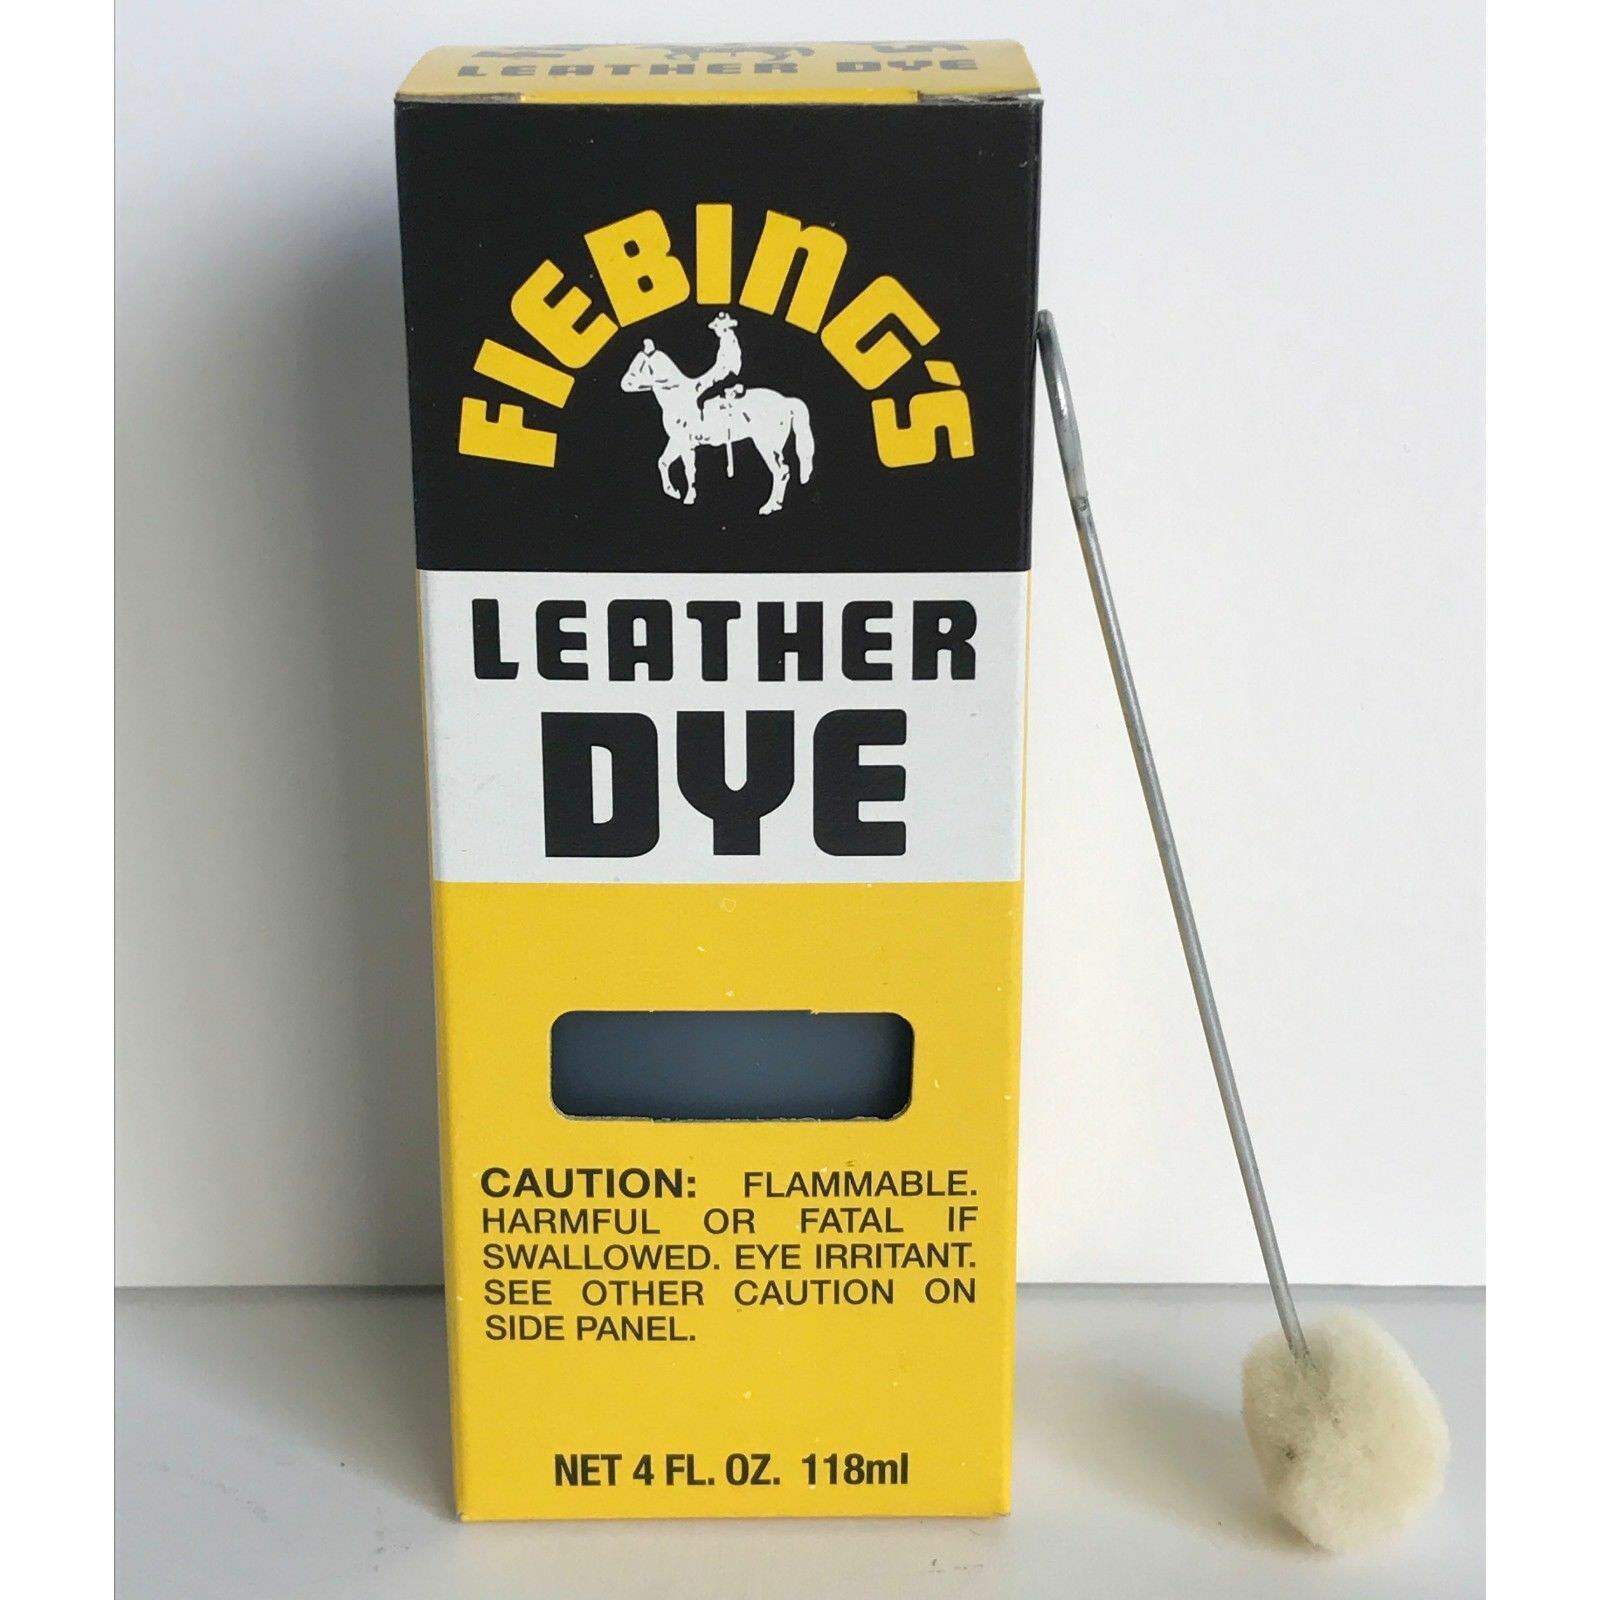 Fiebing's Leather Dye W/ Applicator For Shoes, Boots, Bags, Couches (all Colors)